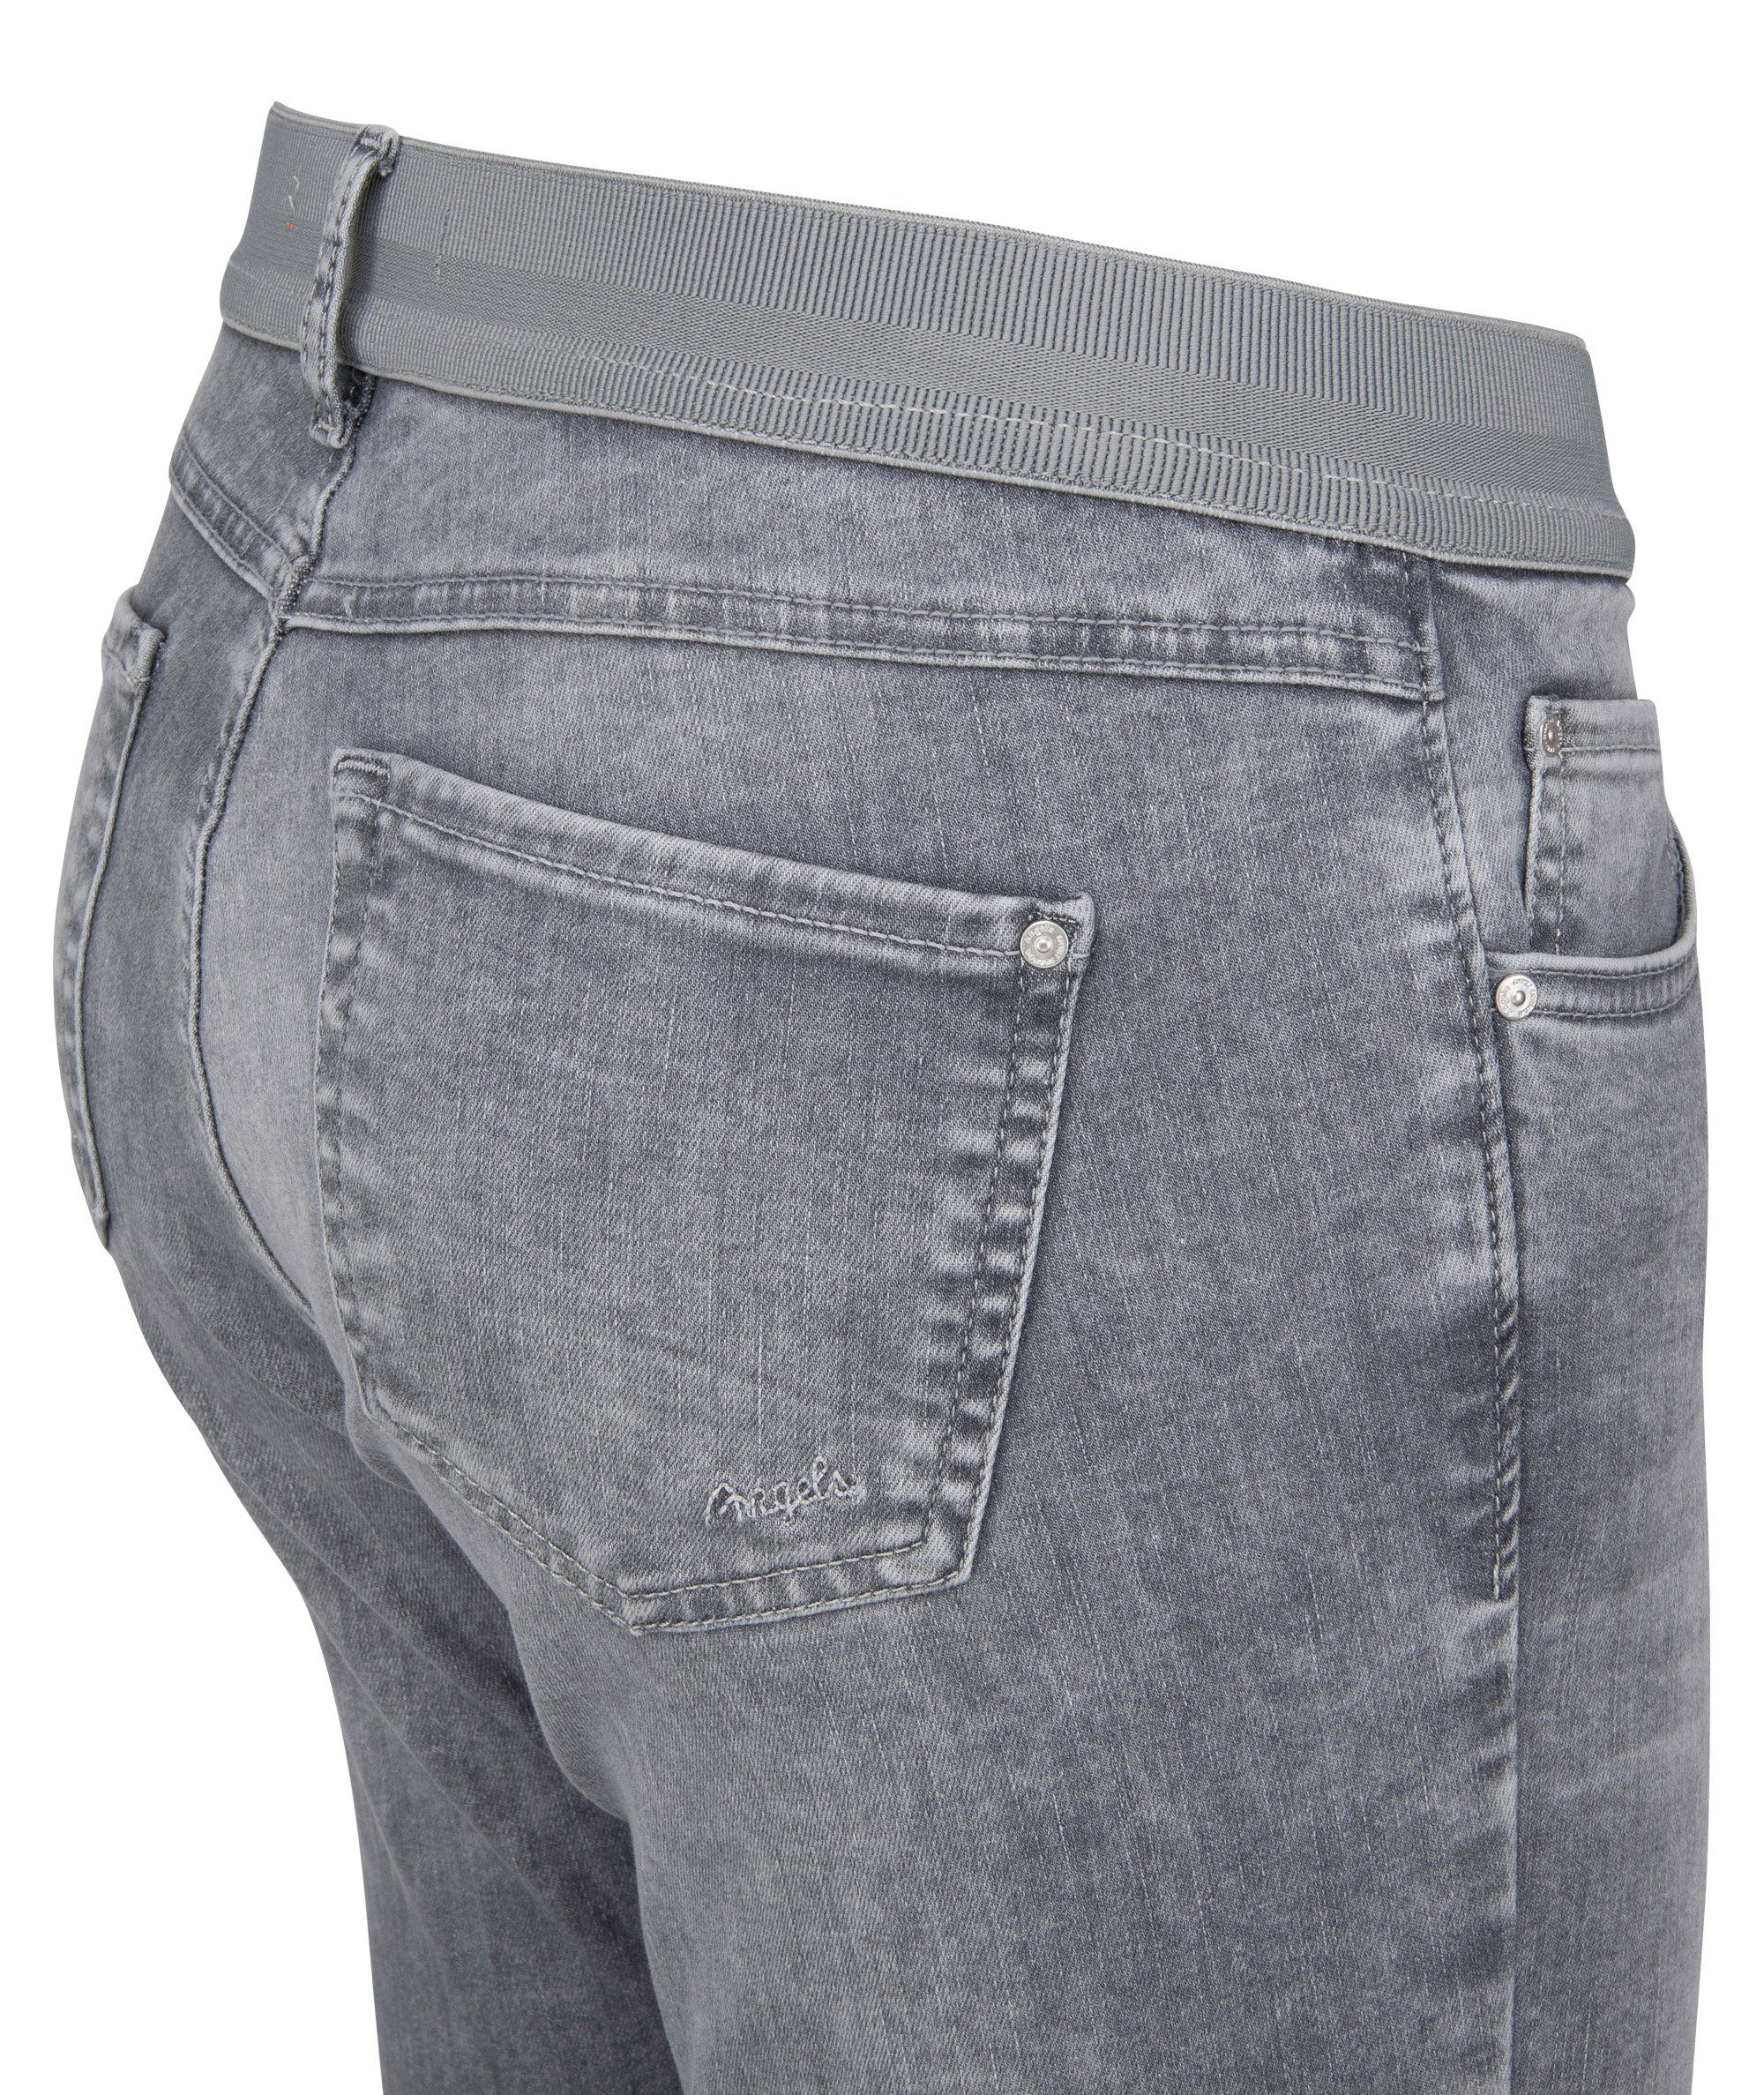 SIZE ANGELS Stretch-Jeans used STRETC - JEANS 399 grey ONE 123730.14758 random ANGELS light